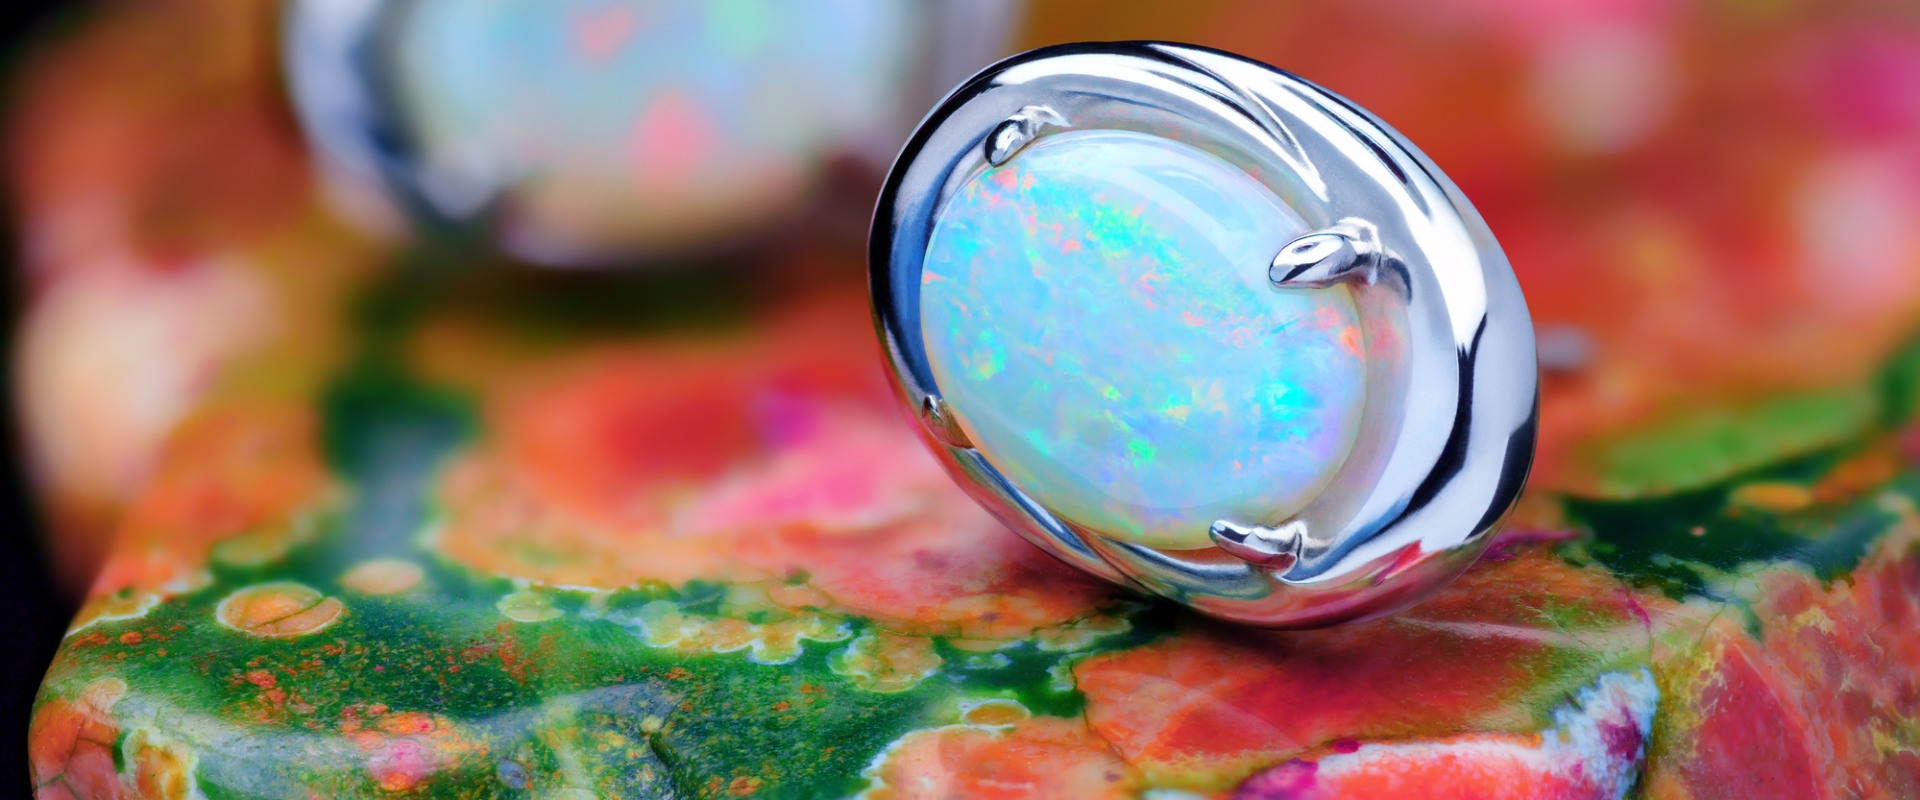 Does opal have a special meaning?